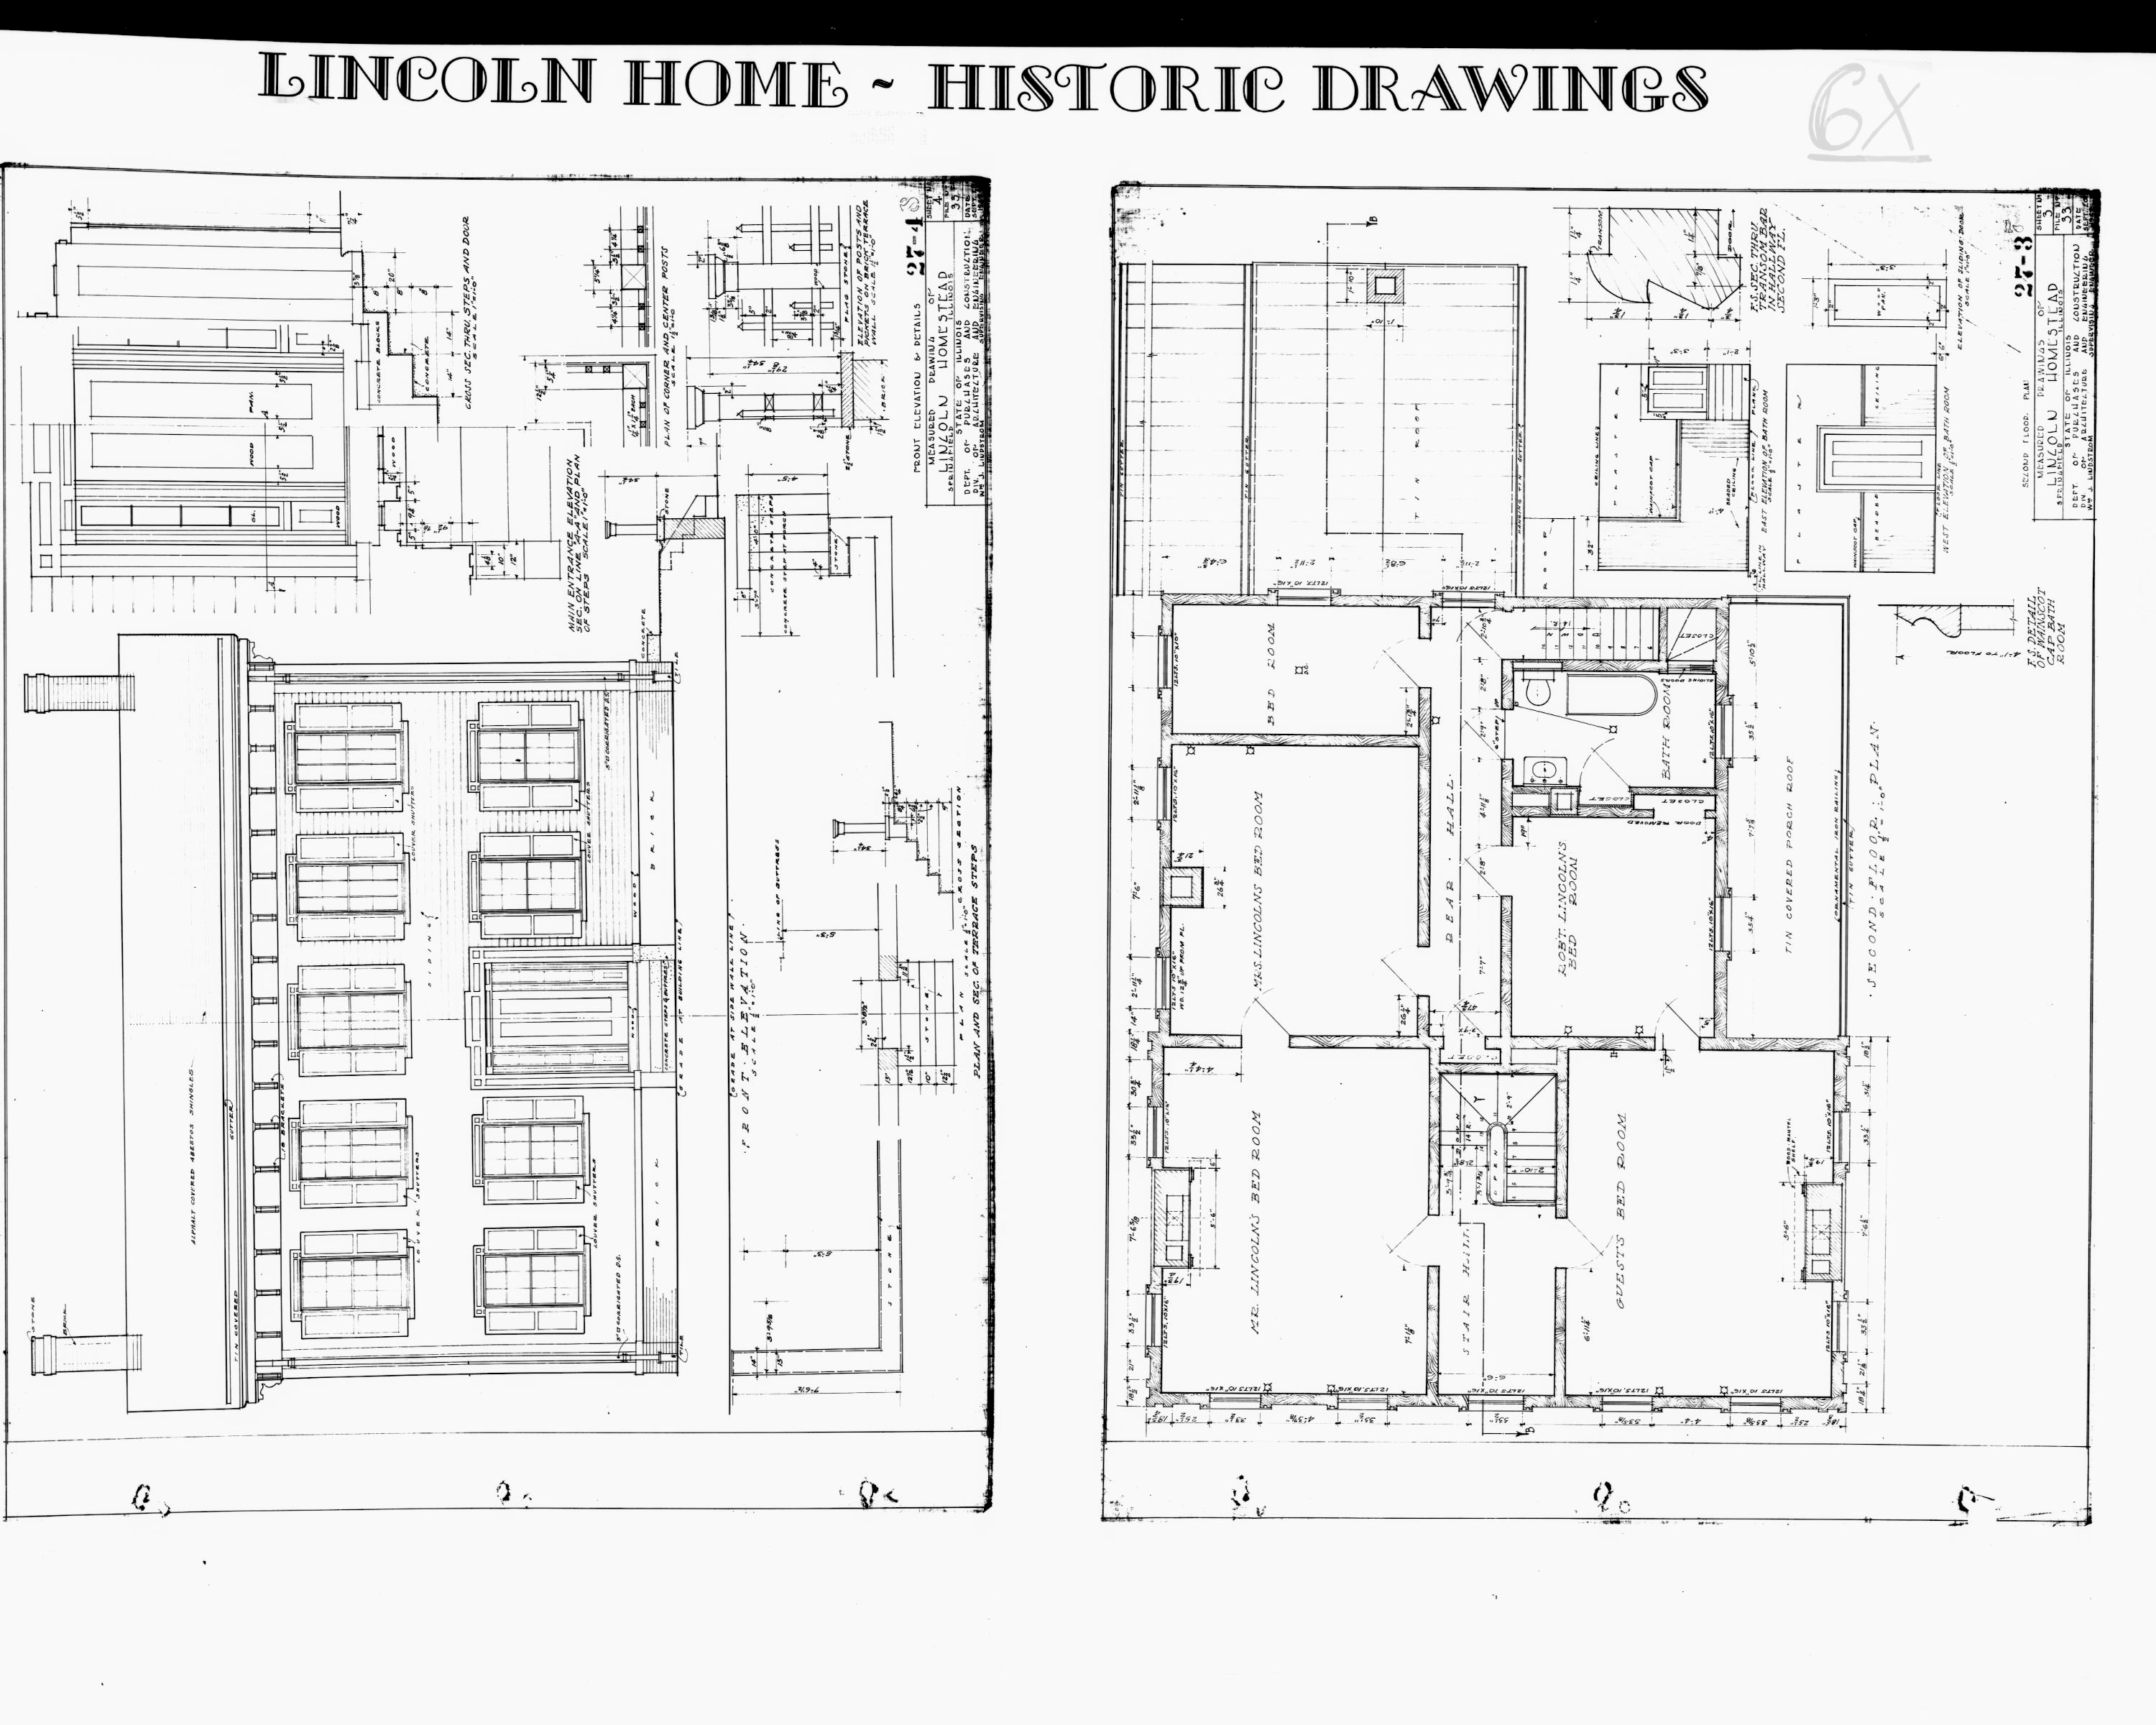 Lincoln Home - Historic Drawings 8 Lincoln, home, historic drawings, front elevation and details, second floor plan